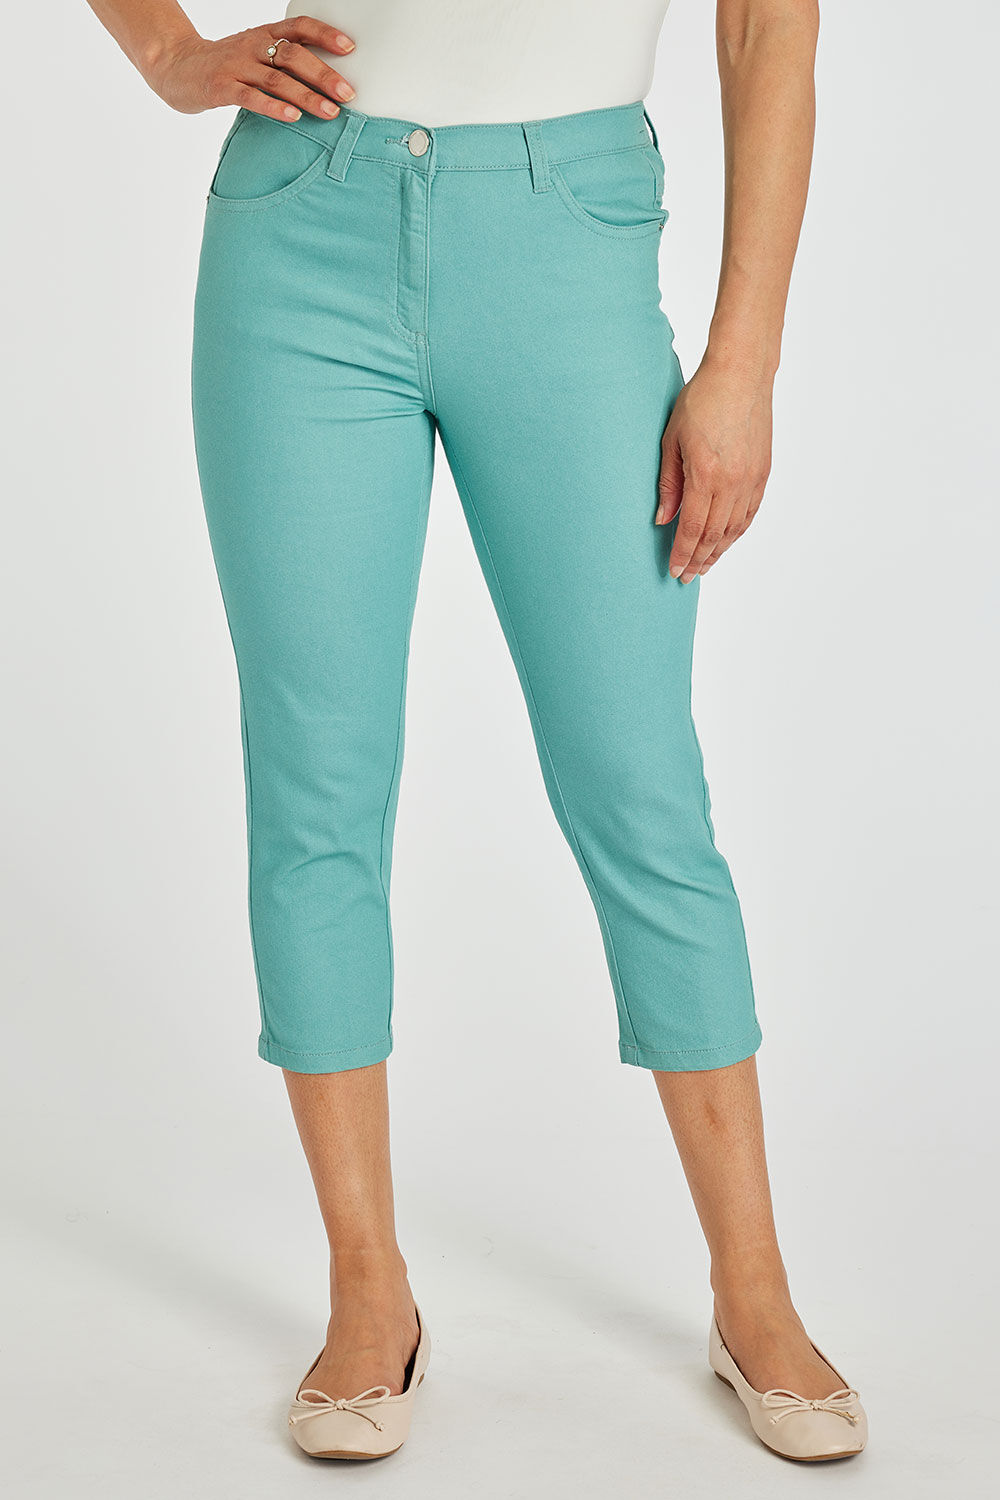 Bonmarche Green The Sara Coloured Cropped Jeans, Size: 24